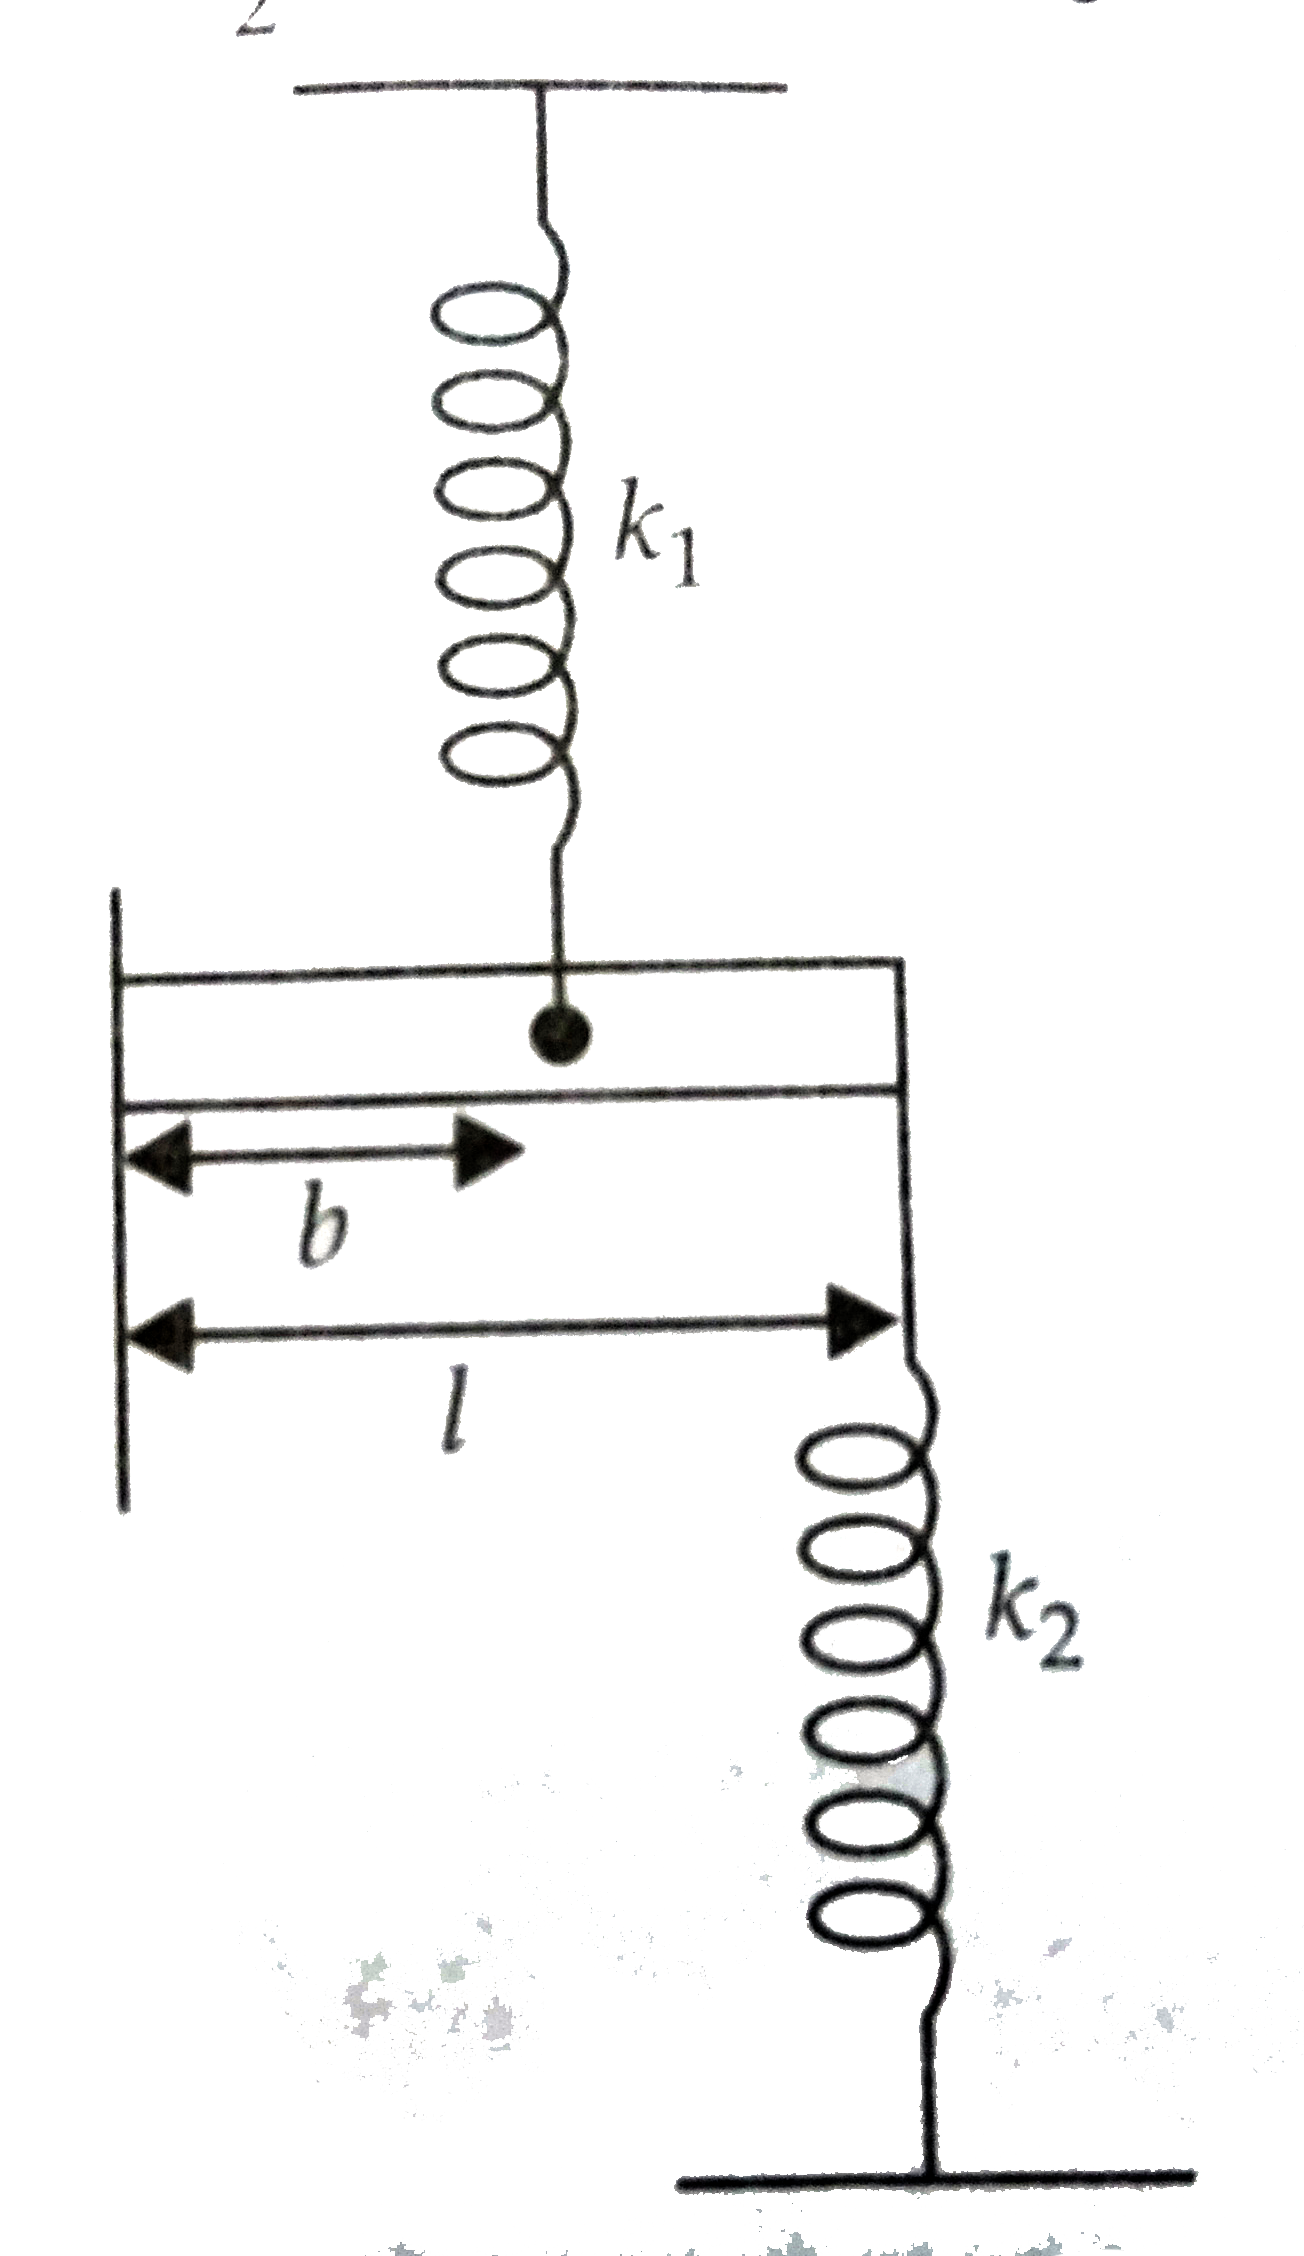 A rod of mass m and length l is connected by two spring of spring constants k(1) and k(2), so that it is horizontal at equilibrium. What is the natural frequency of the system?